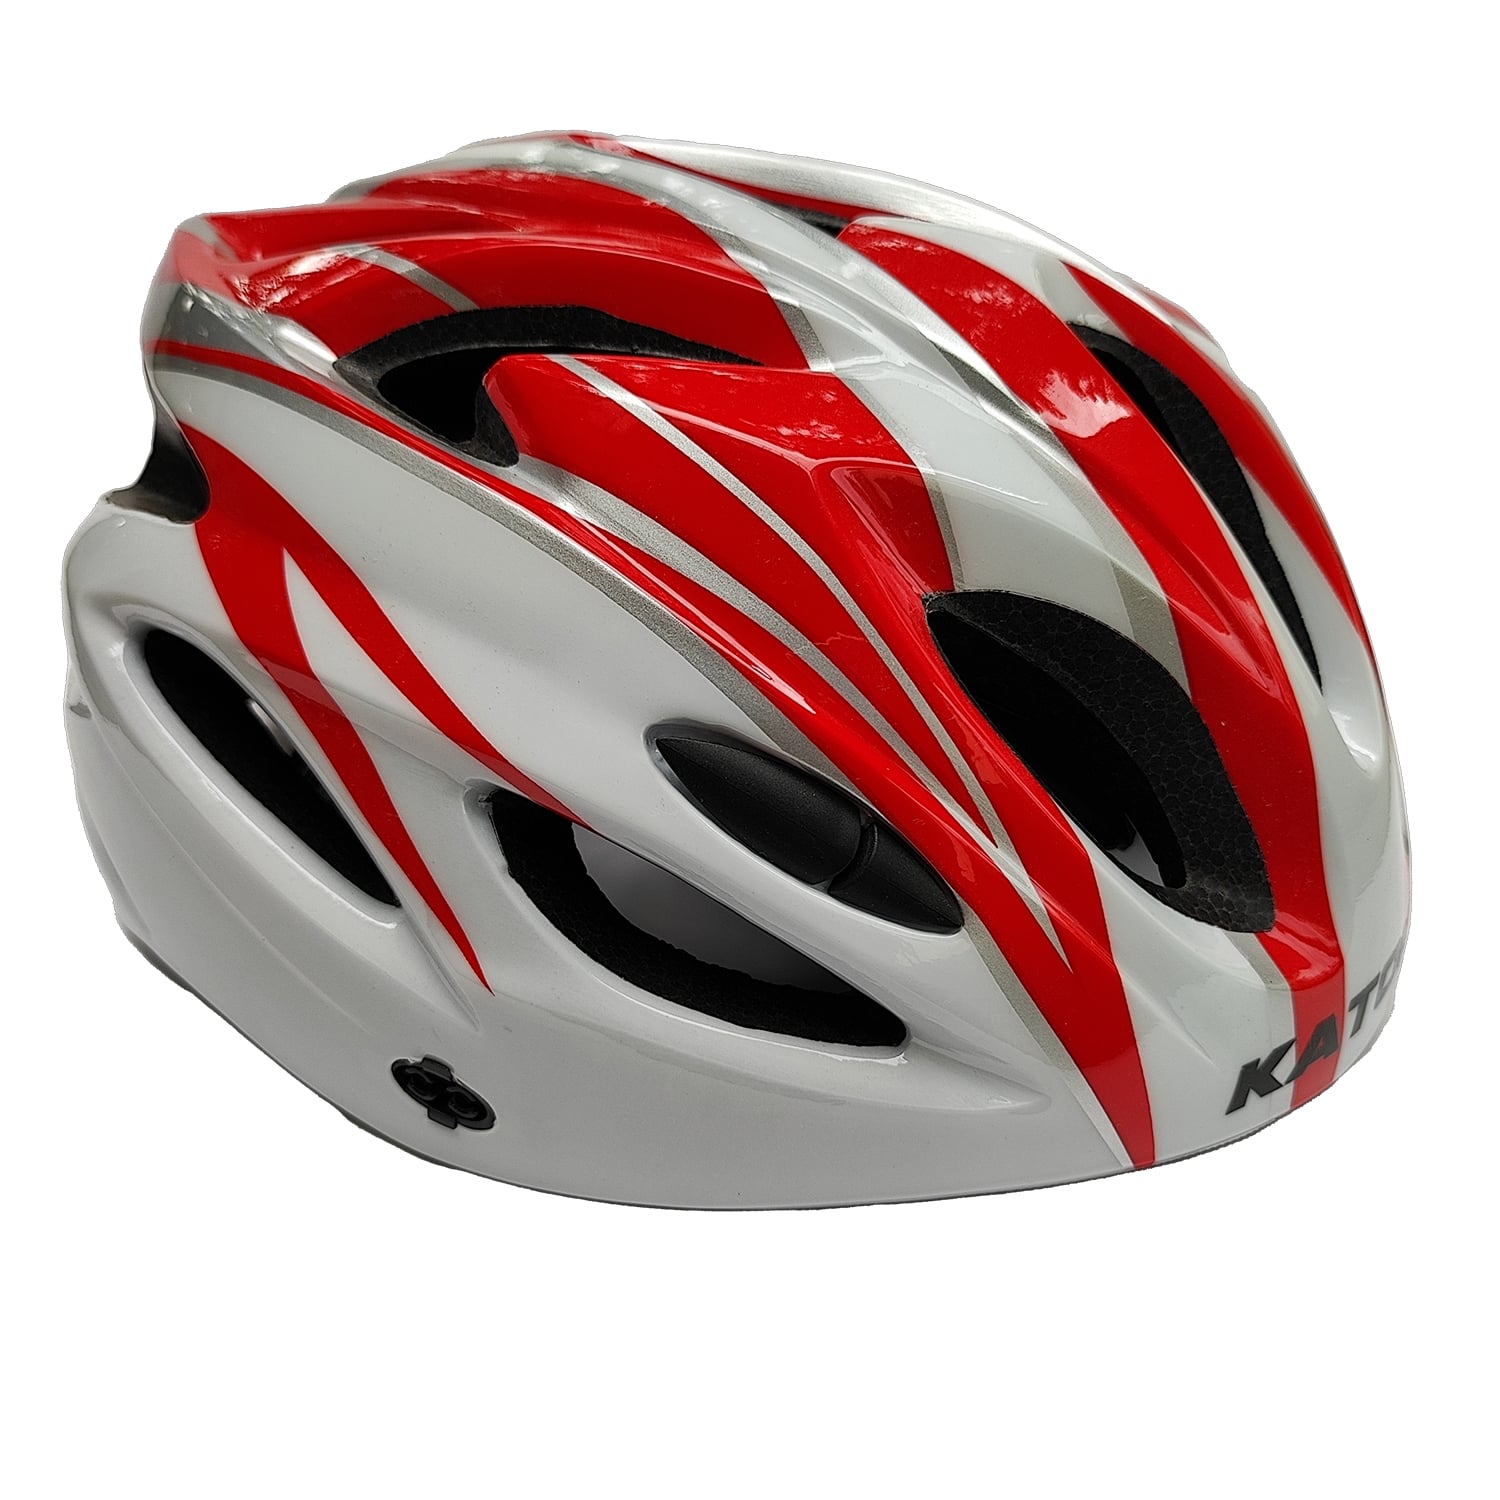 Bicycle helmet red & white color side view by omobikes